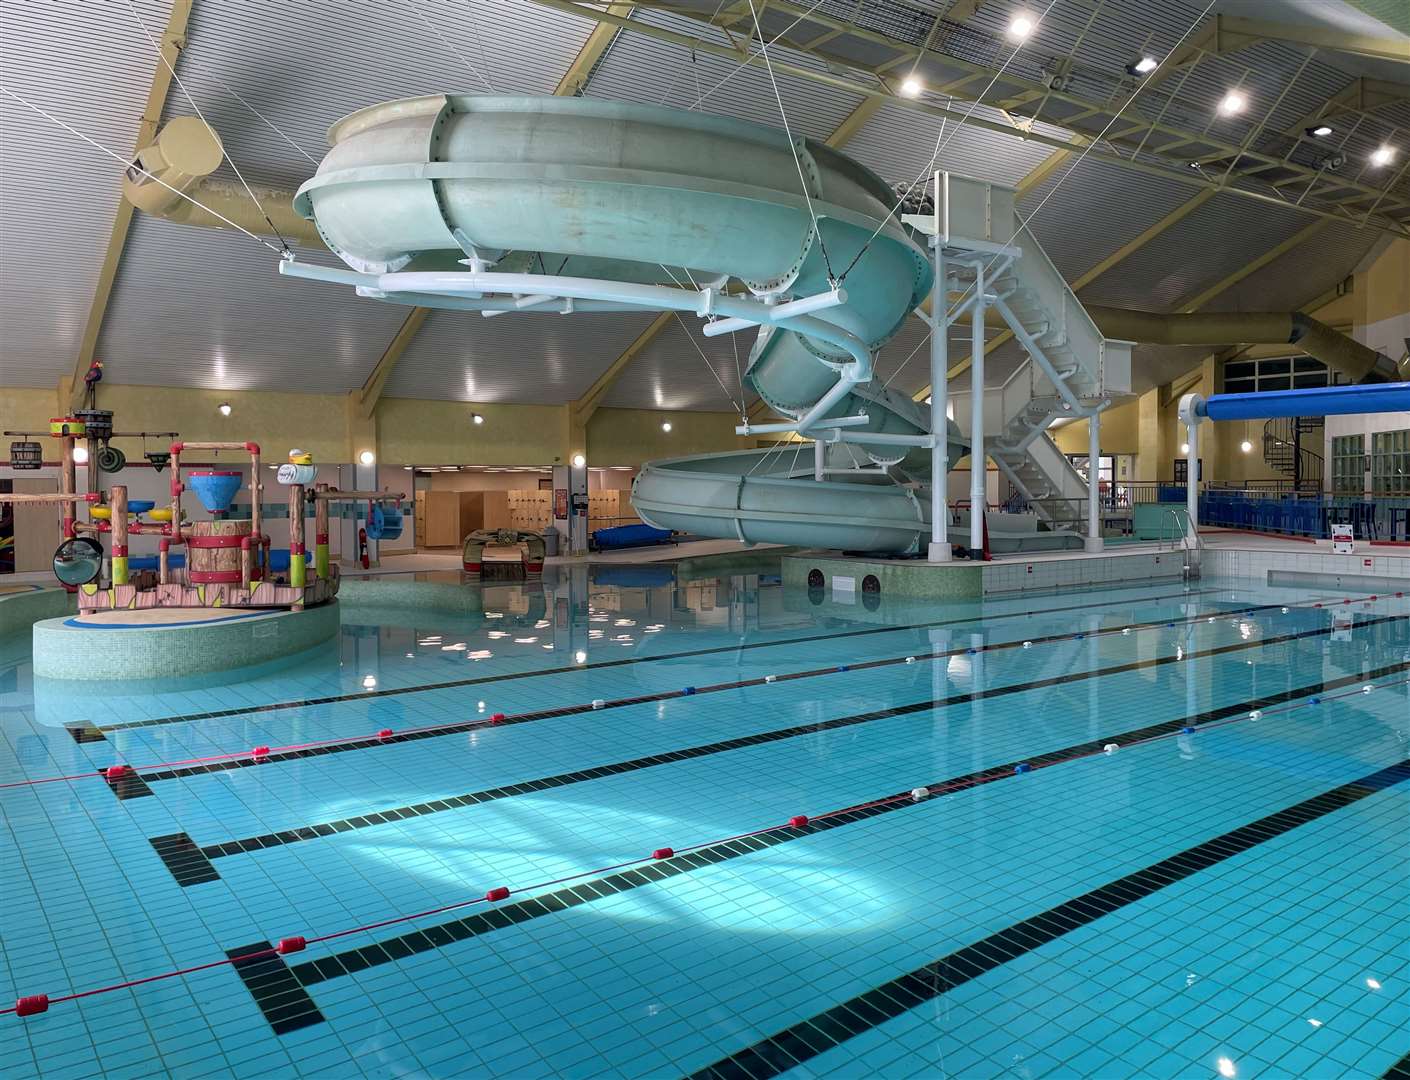 The swimming pool at Tenterden Leisure Centre is finally set to reopen